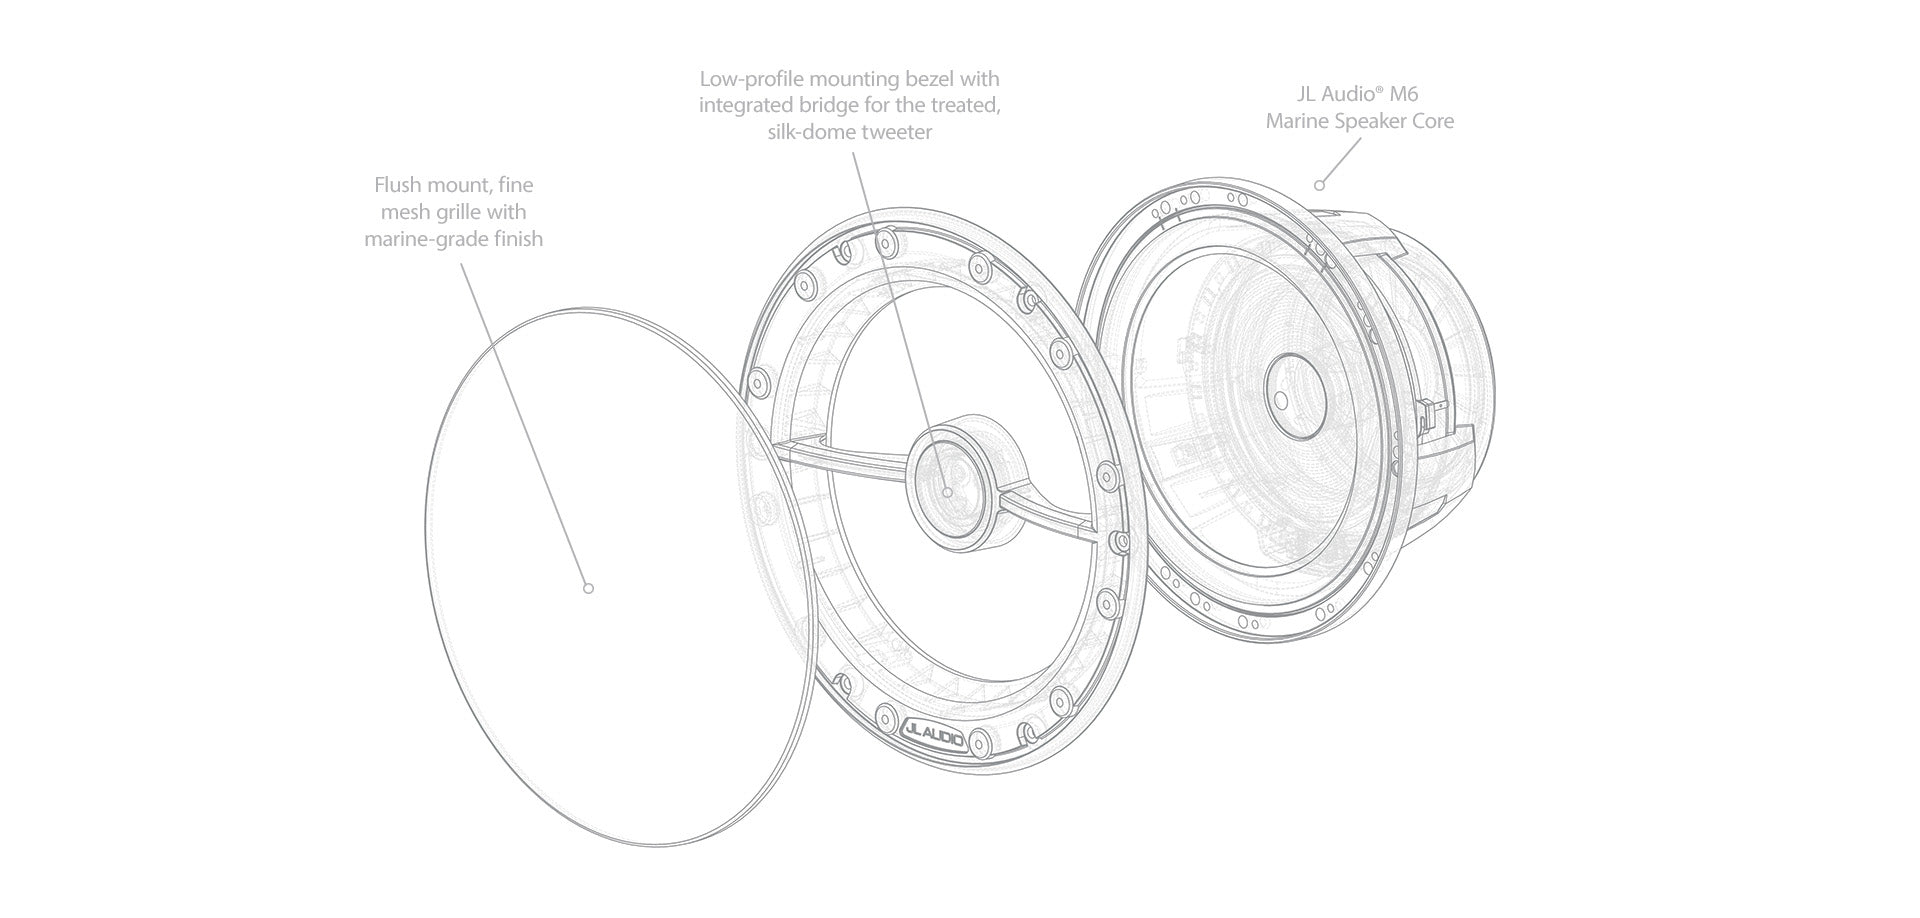 An anatomical diagram of the M6 Luxe, showcasing it's core, bezel, tweeter and grille.